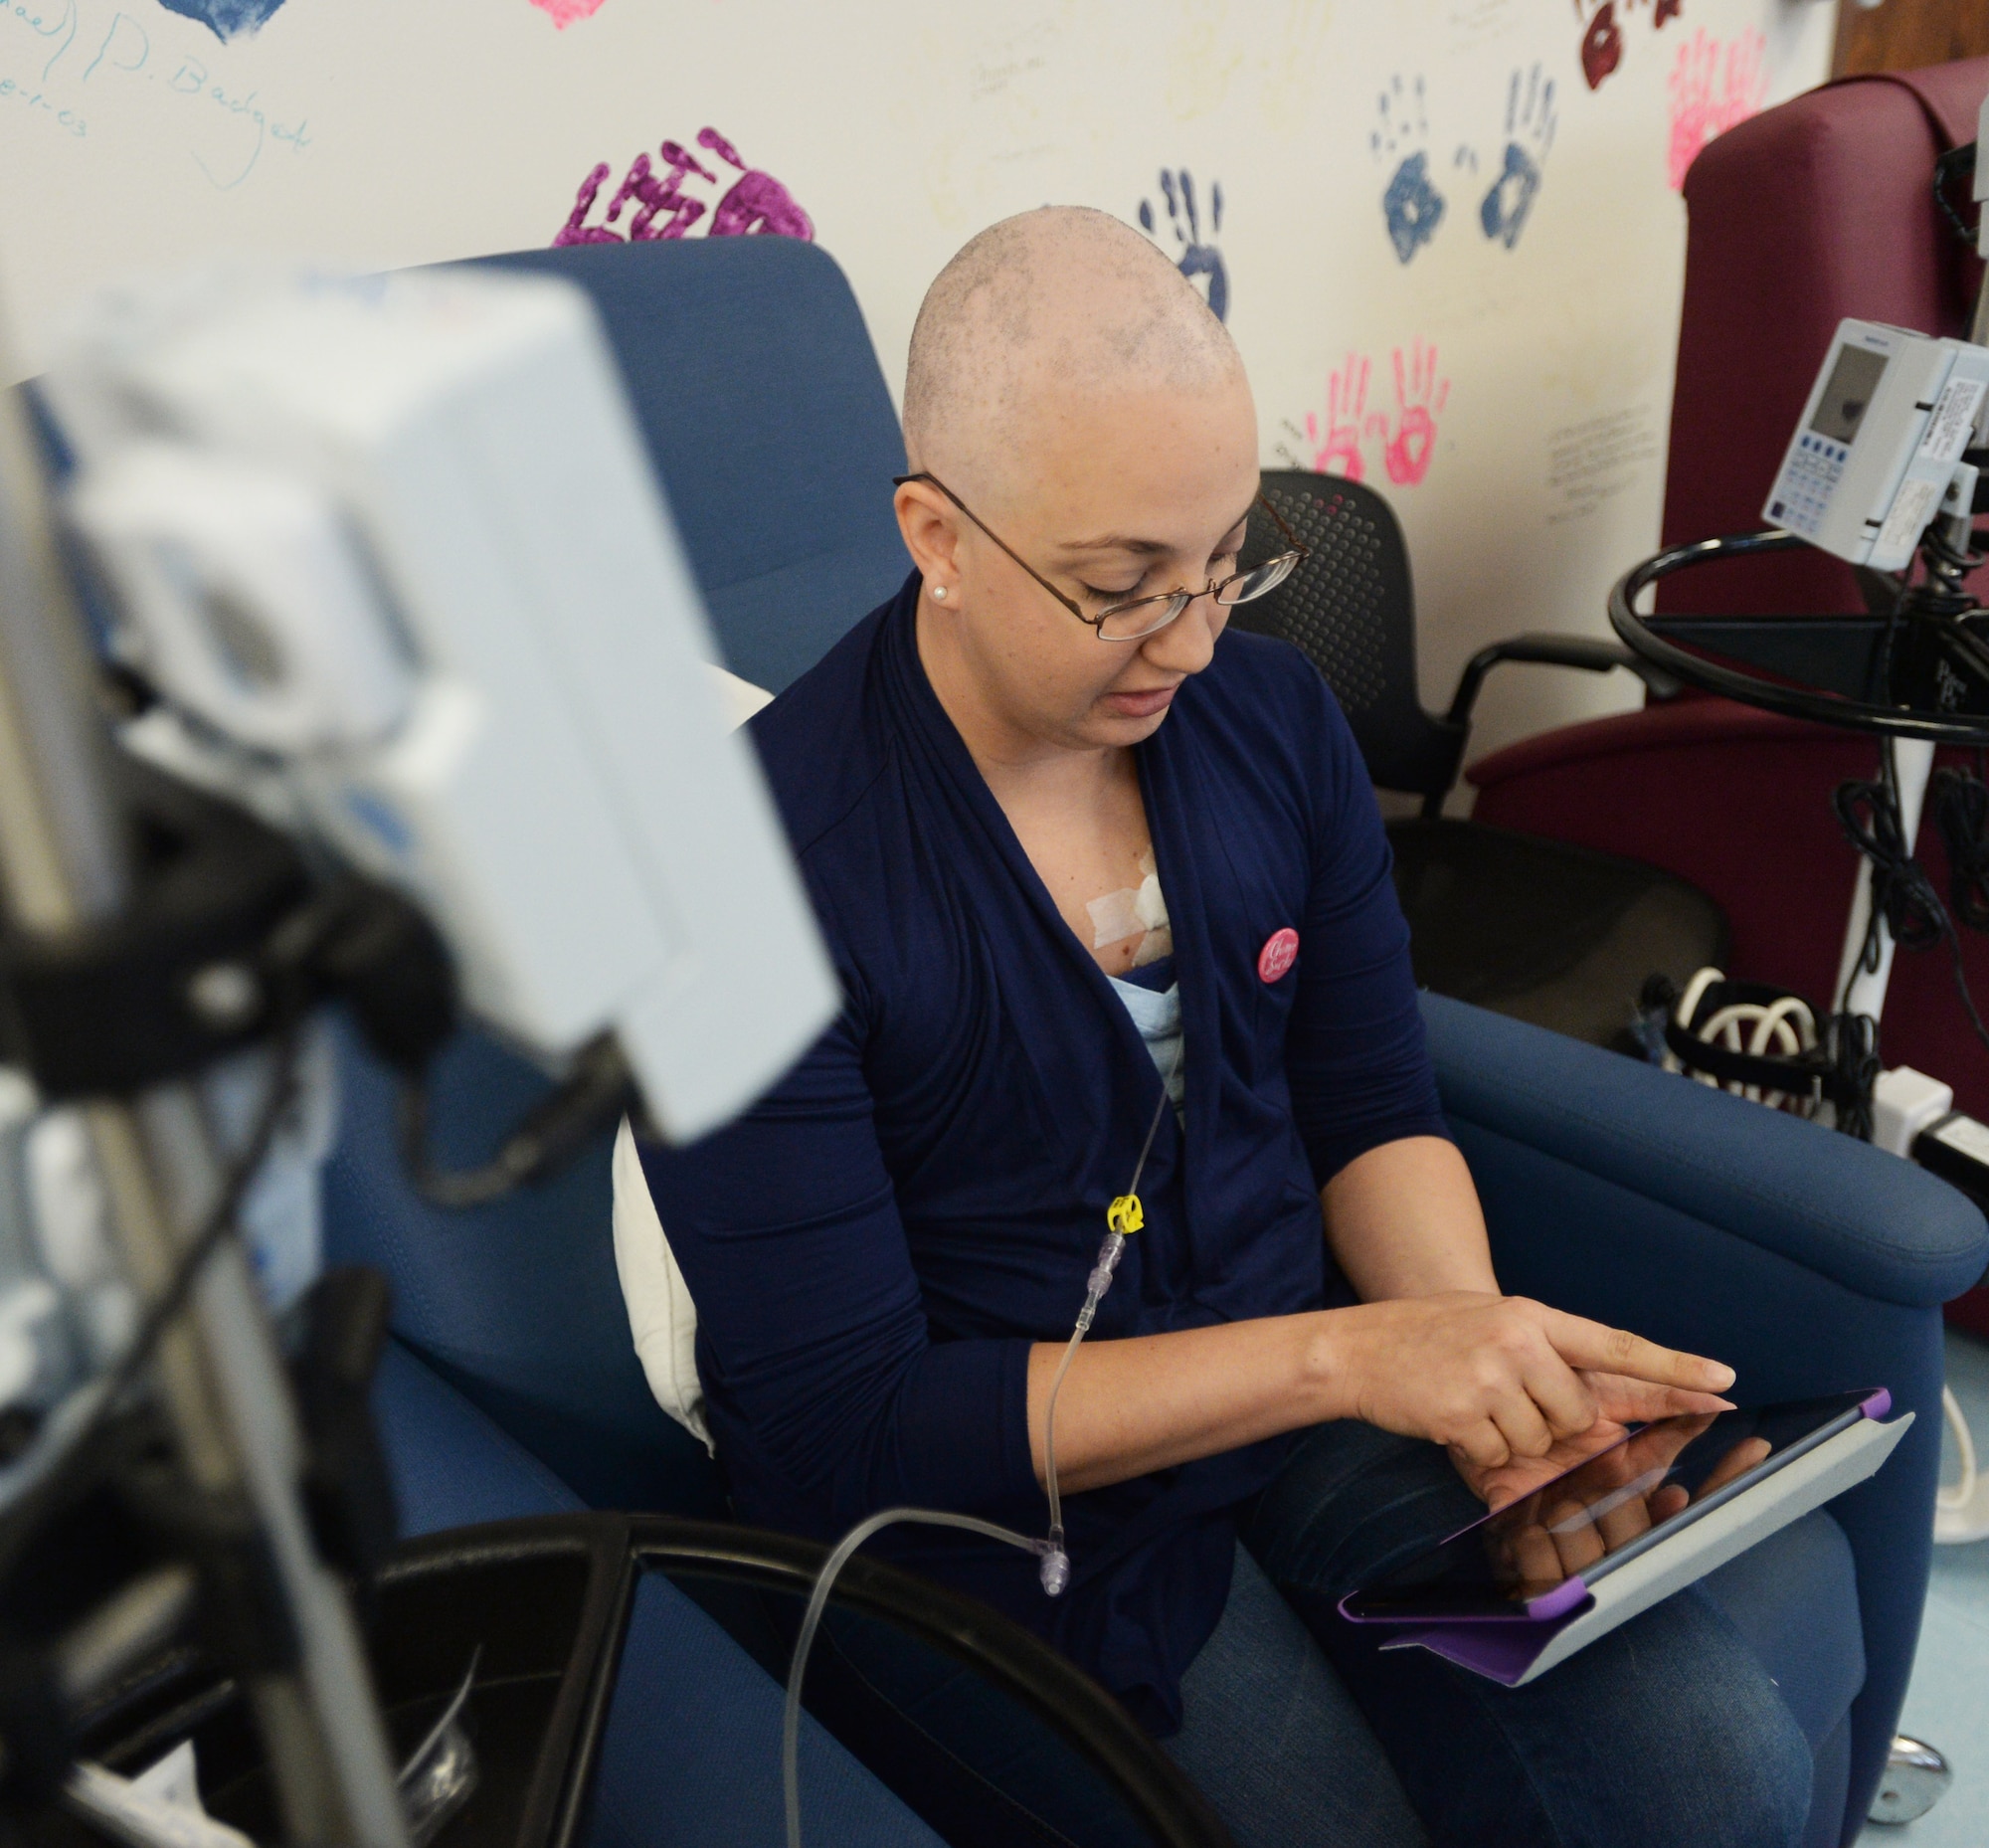 Staff Sgt. Amanda Dick reads an eBook during her chemotherapy treatment at Tripler Army Medical Center, Honolulu, Hawaii, Feb. 26, 2014. Since being diagnosed with breast cancer in October 2013, Dick has finished one-of-two rounds of chemotherapy, and is expected to be done with treatment in April. (U.S. Air Force photo/Staff Sgt. Alexander Martinez)